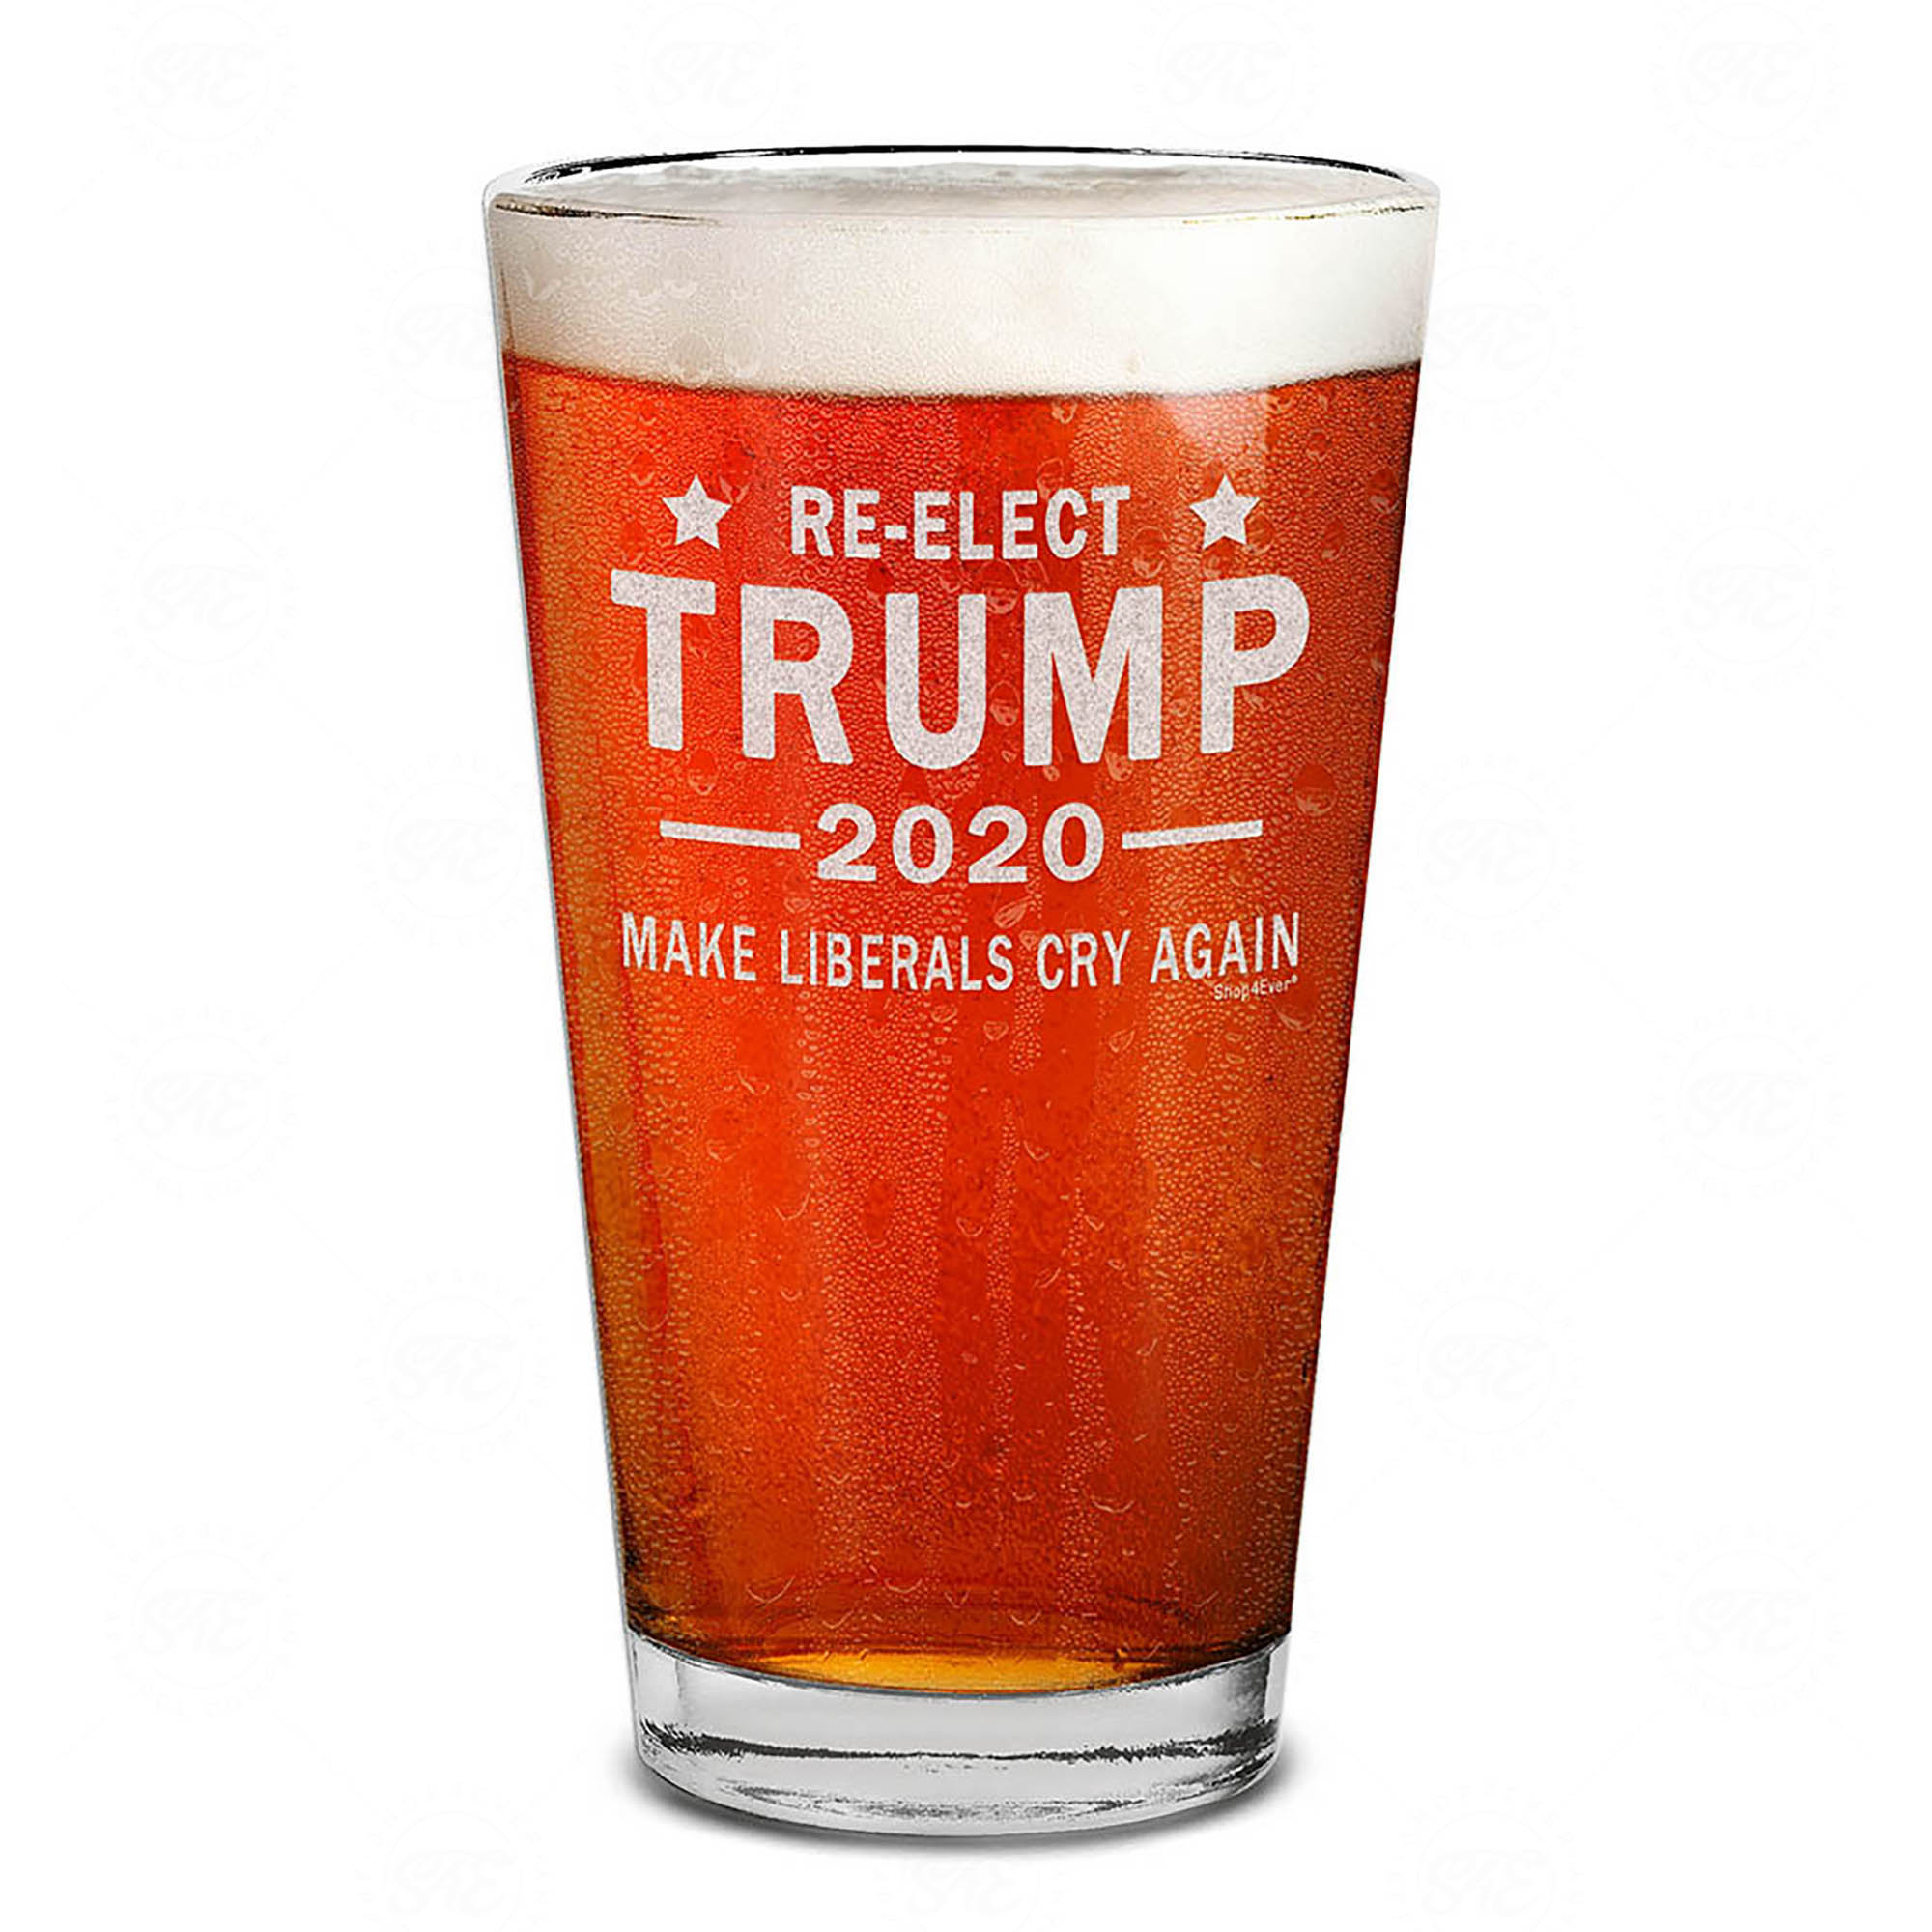 Re-elect Trump 2020 Make Liberals Cry Again Laser Engraved Beer Pint Glass